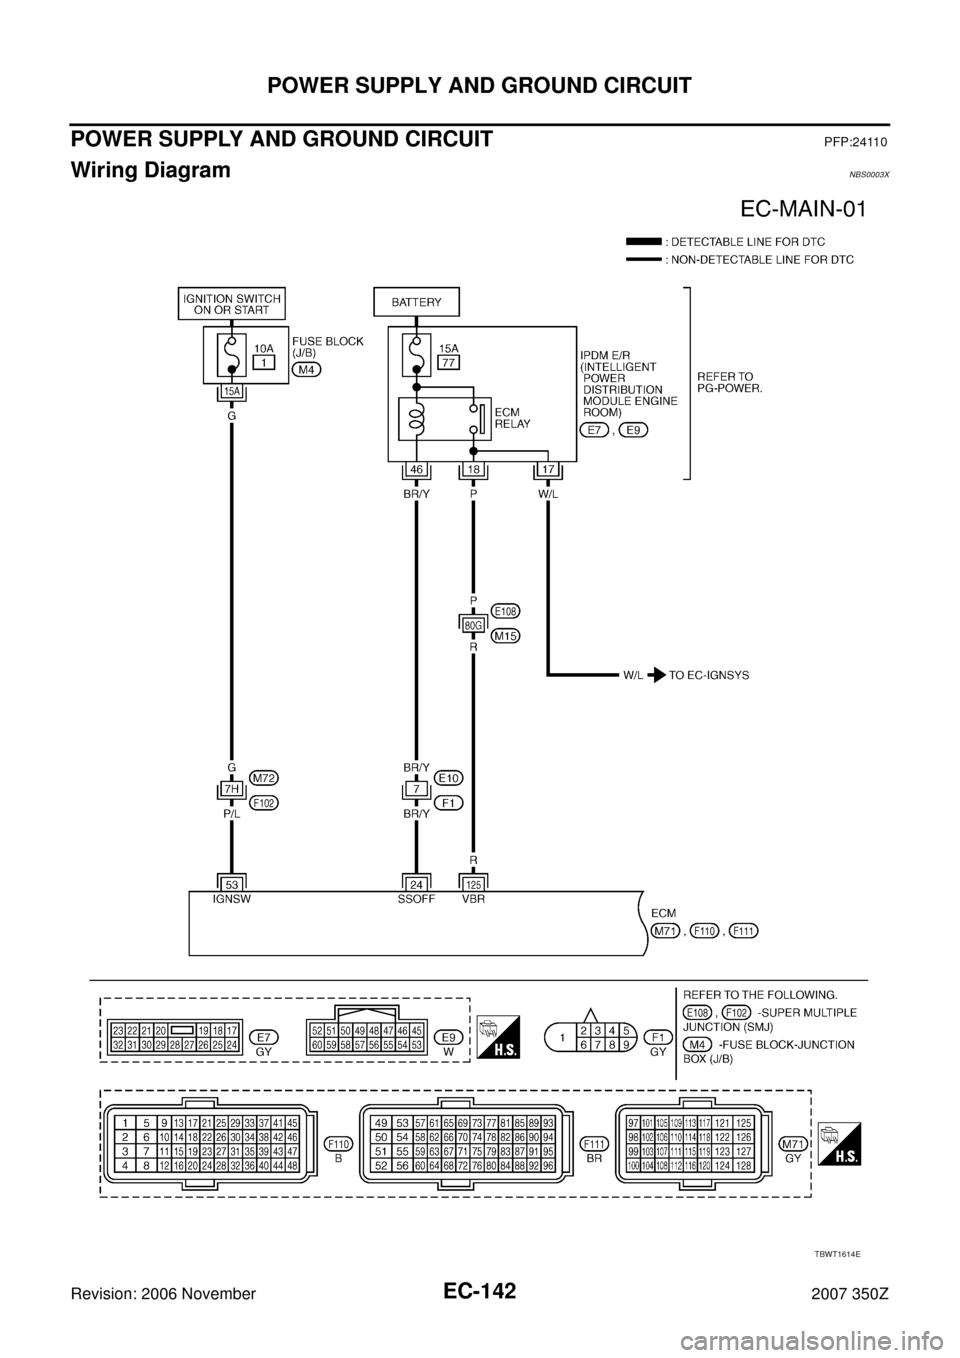 NISSAN 350Z 2007 Z33 Engine Control Workshop Manual EC-142
POWER SUPPLY AND GROUND CIRCUIT
Revision: 2006 November2007 350Z
POWER SUPPLY AND GROUND CIRCUITPFP:24110
Wiring DiagramNBS0003X
TBWT1614E 